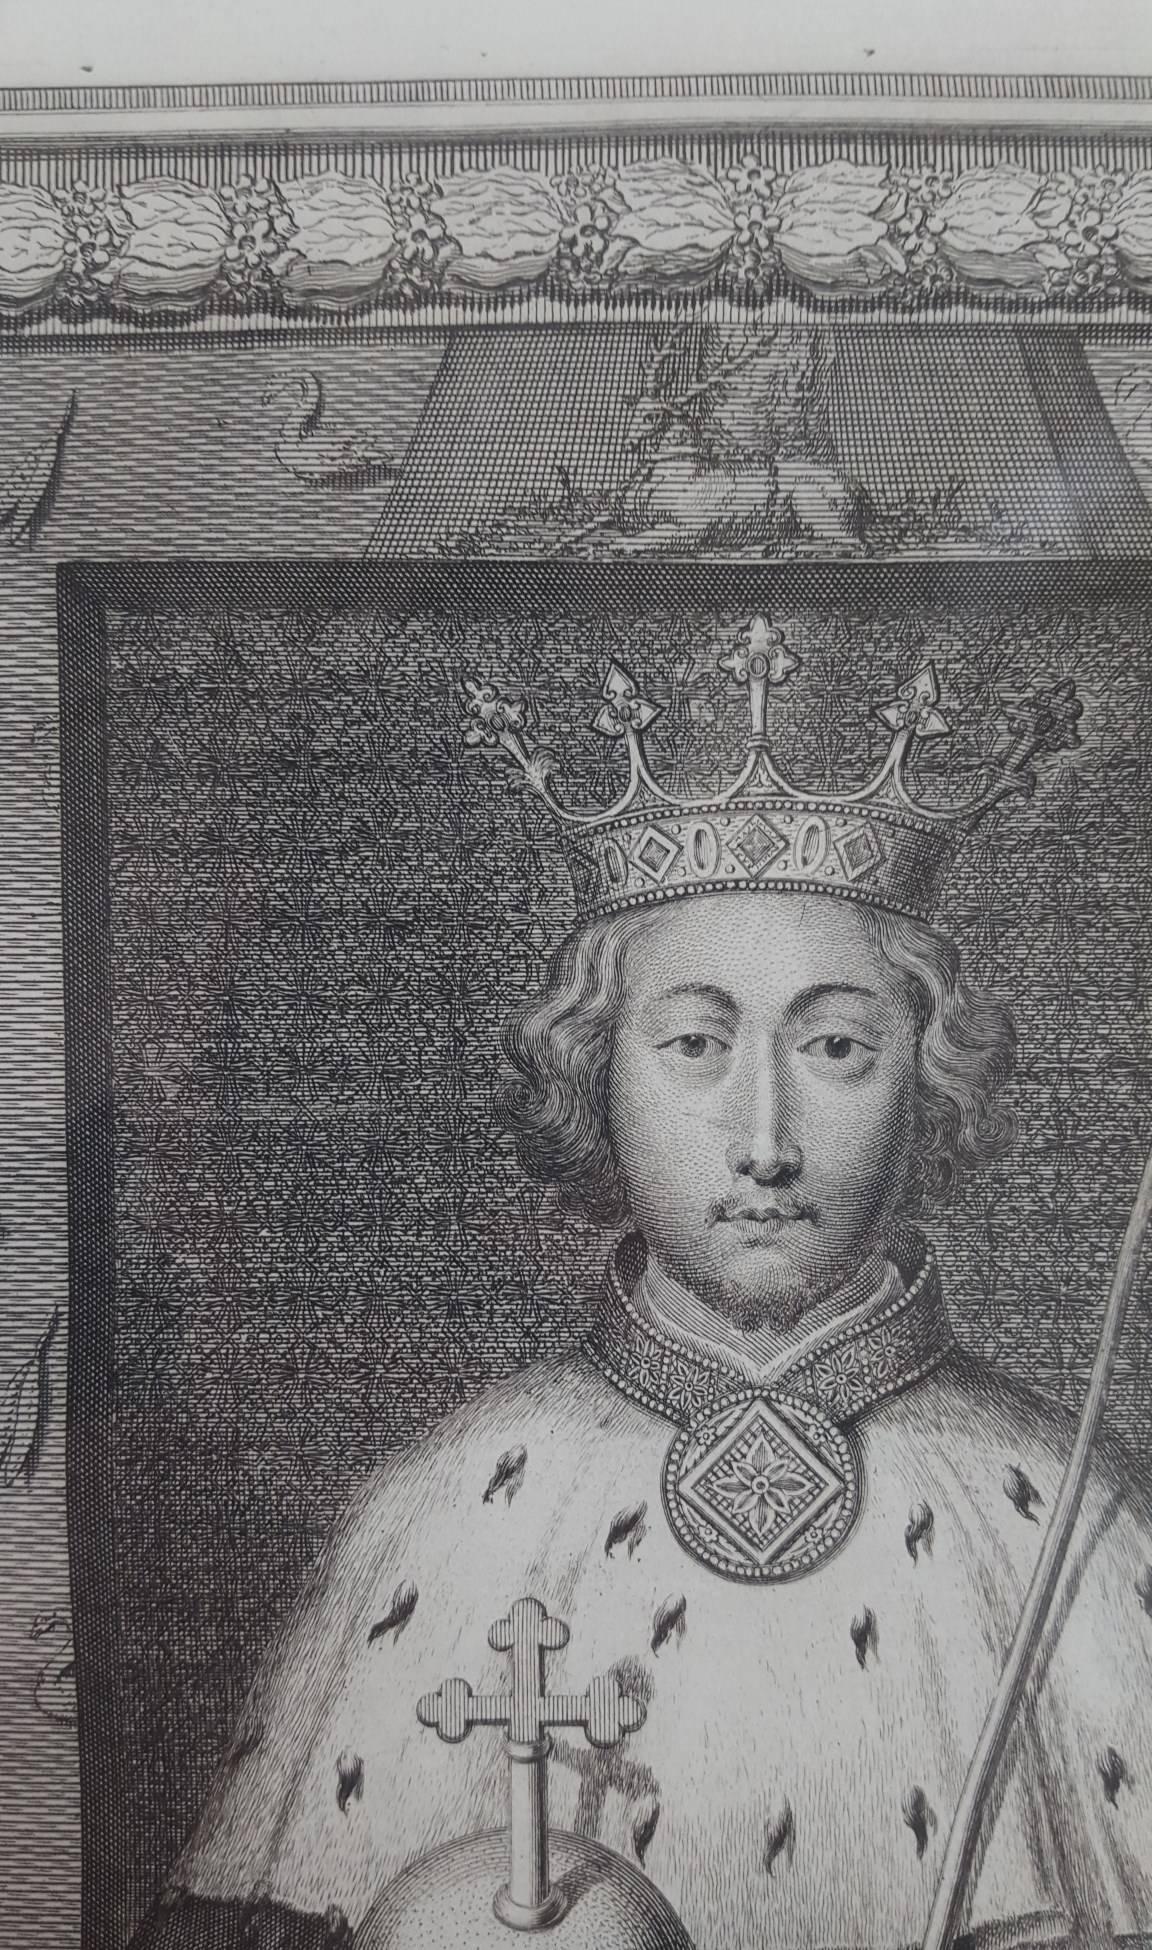 King Richard II /// Old Masters British Royal Family Portrait Engraving Art - Baroque Print by George Virtue